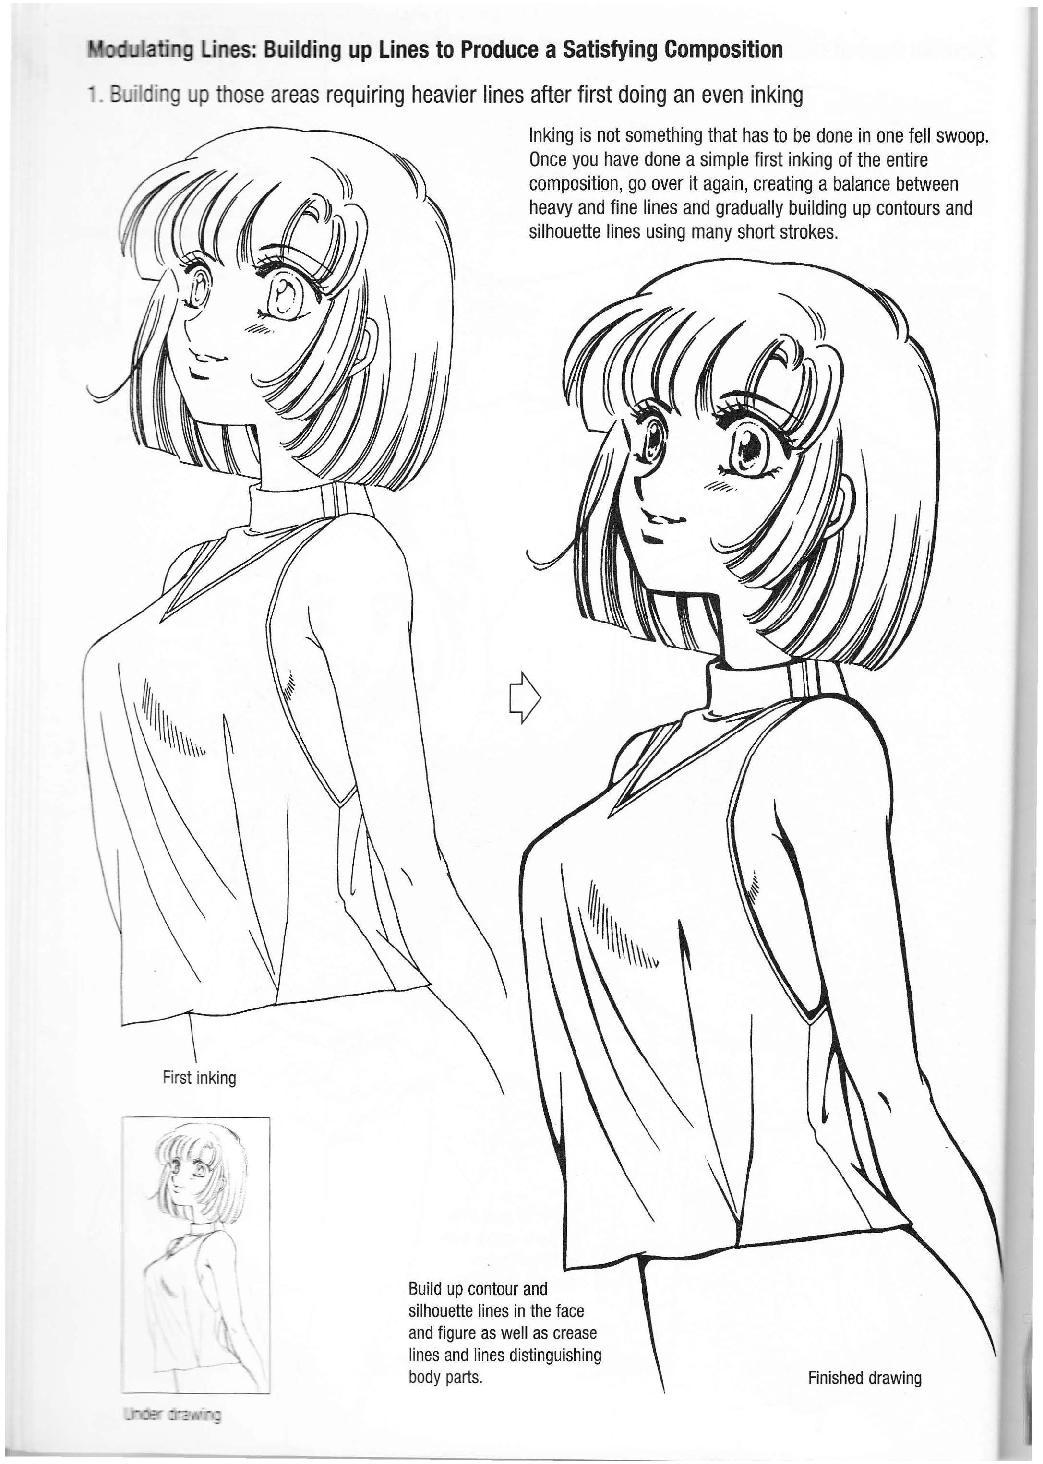 More How to Draw Manga Vol. 2 - Penning Characters 19